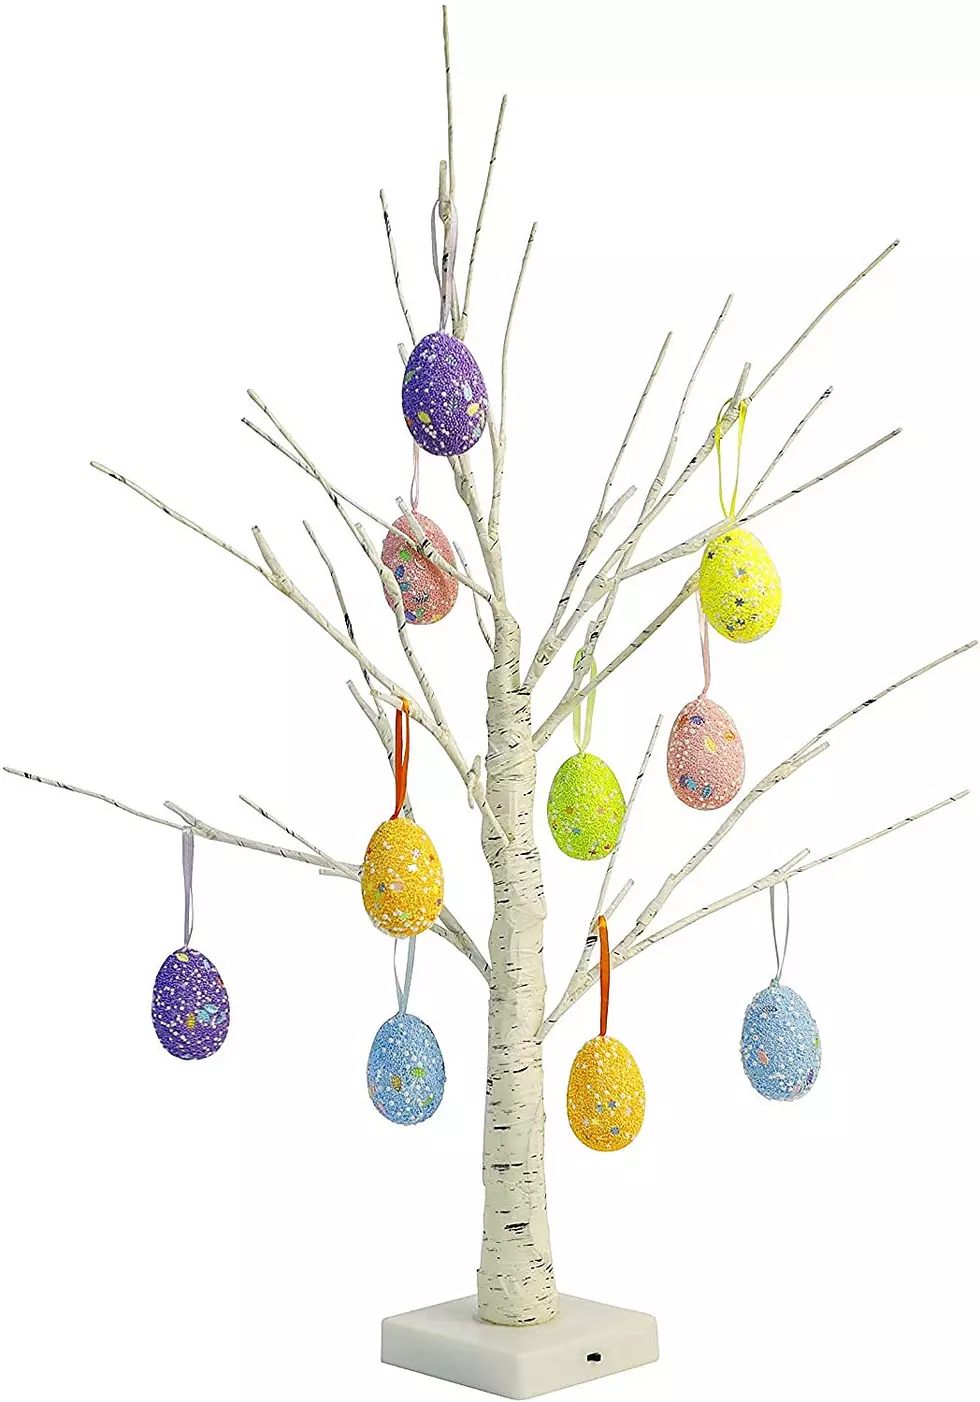 Easter Tree Interest Up 900% - Here's How to Get 1 in Rochester